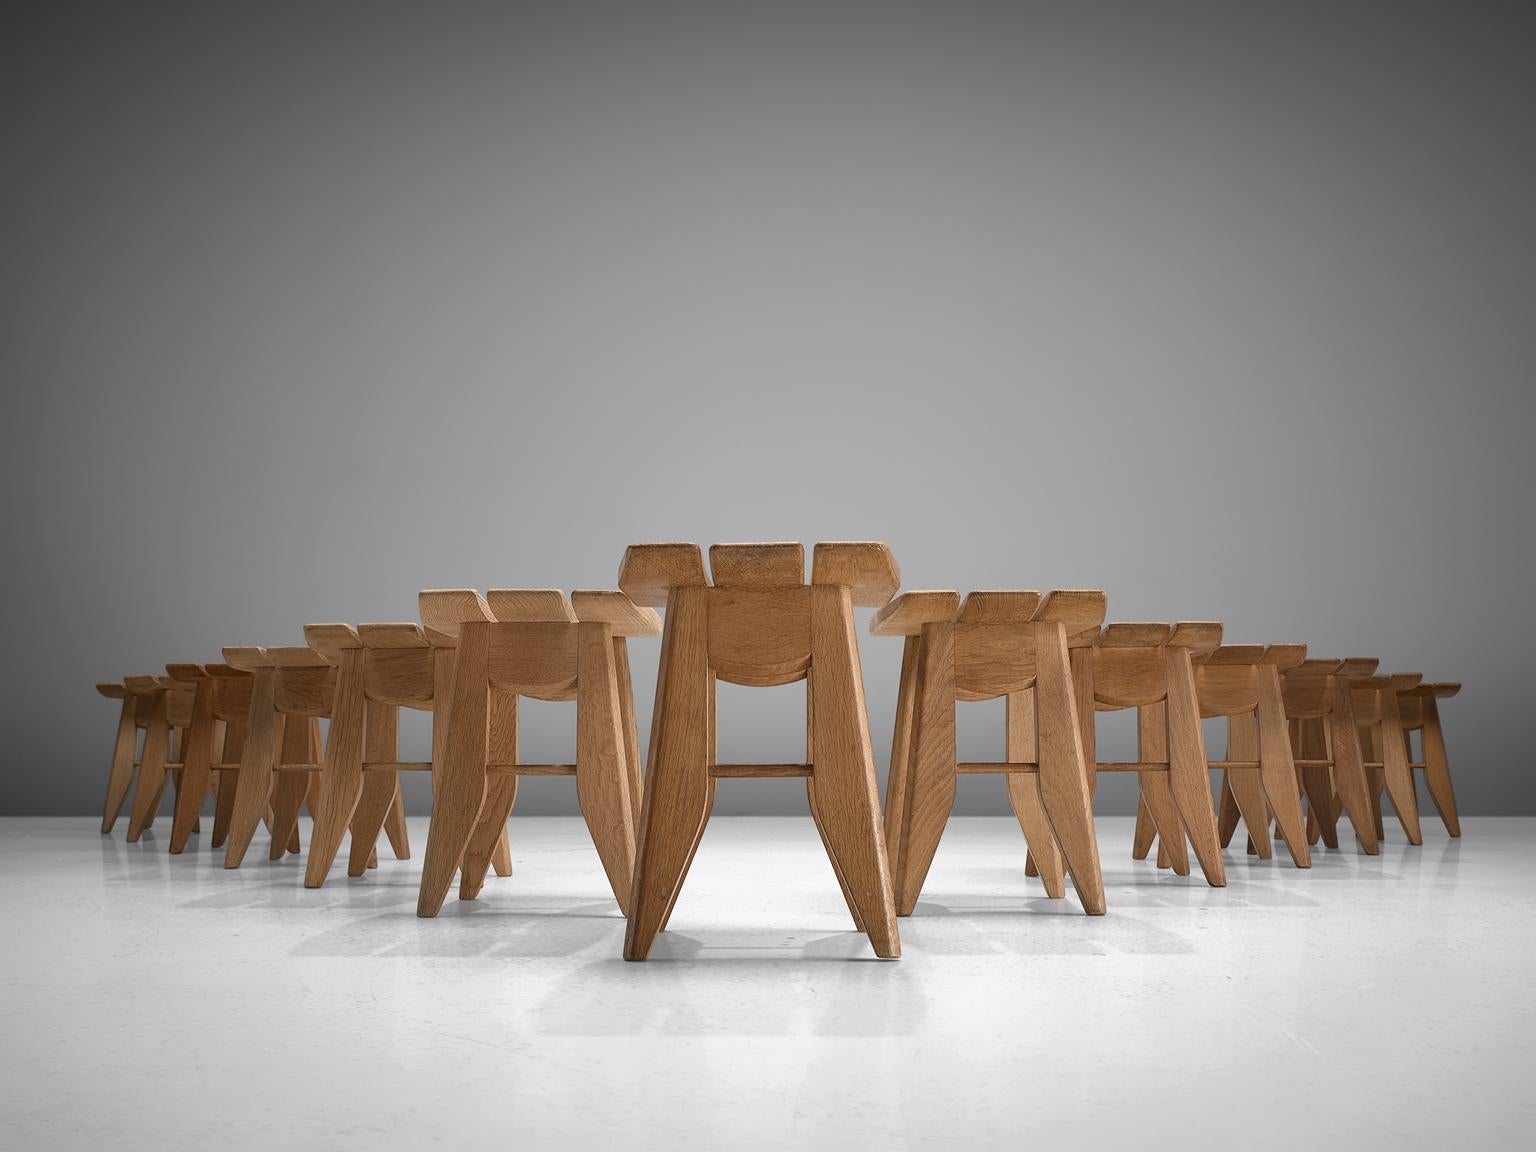 Guillerme et Chambron, 13 stools, solid oak, France, 1960s.

Thirteen tabourets in oak by French designer duo Guillerme and Chambron. These stools have a sculptural, Japanese appearance. The top is made of three slats, the two on the outside are